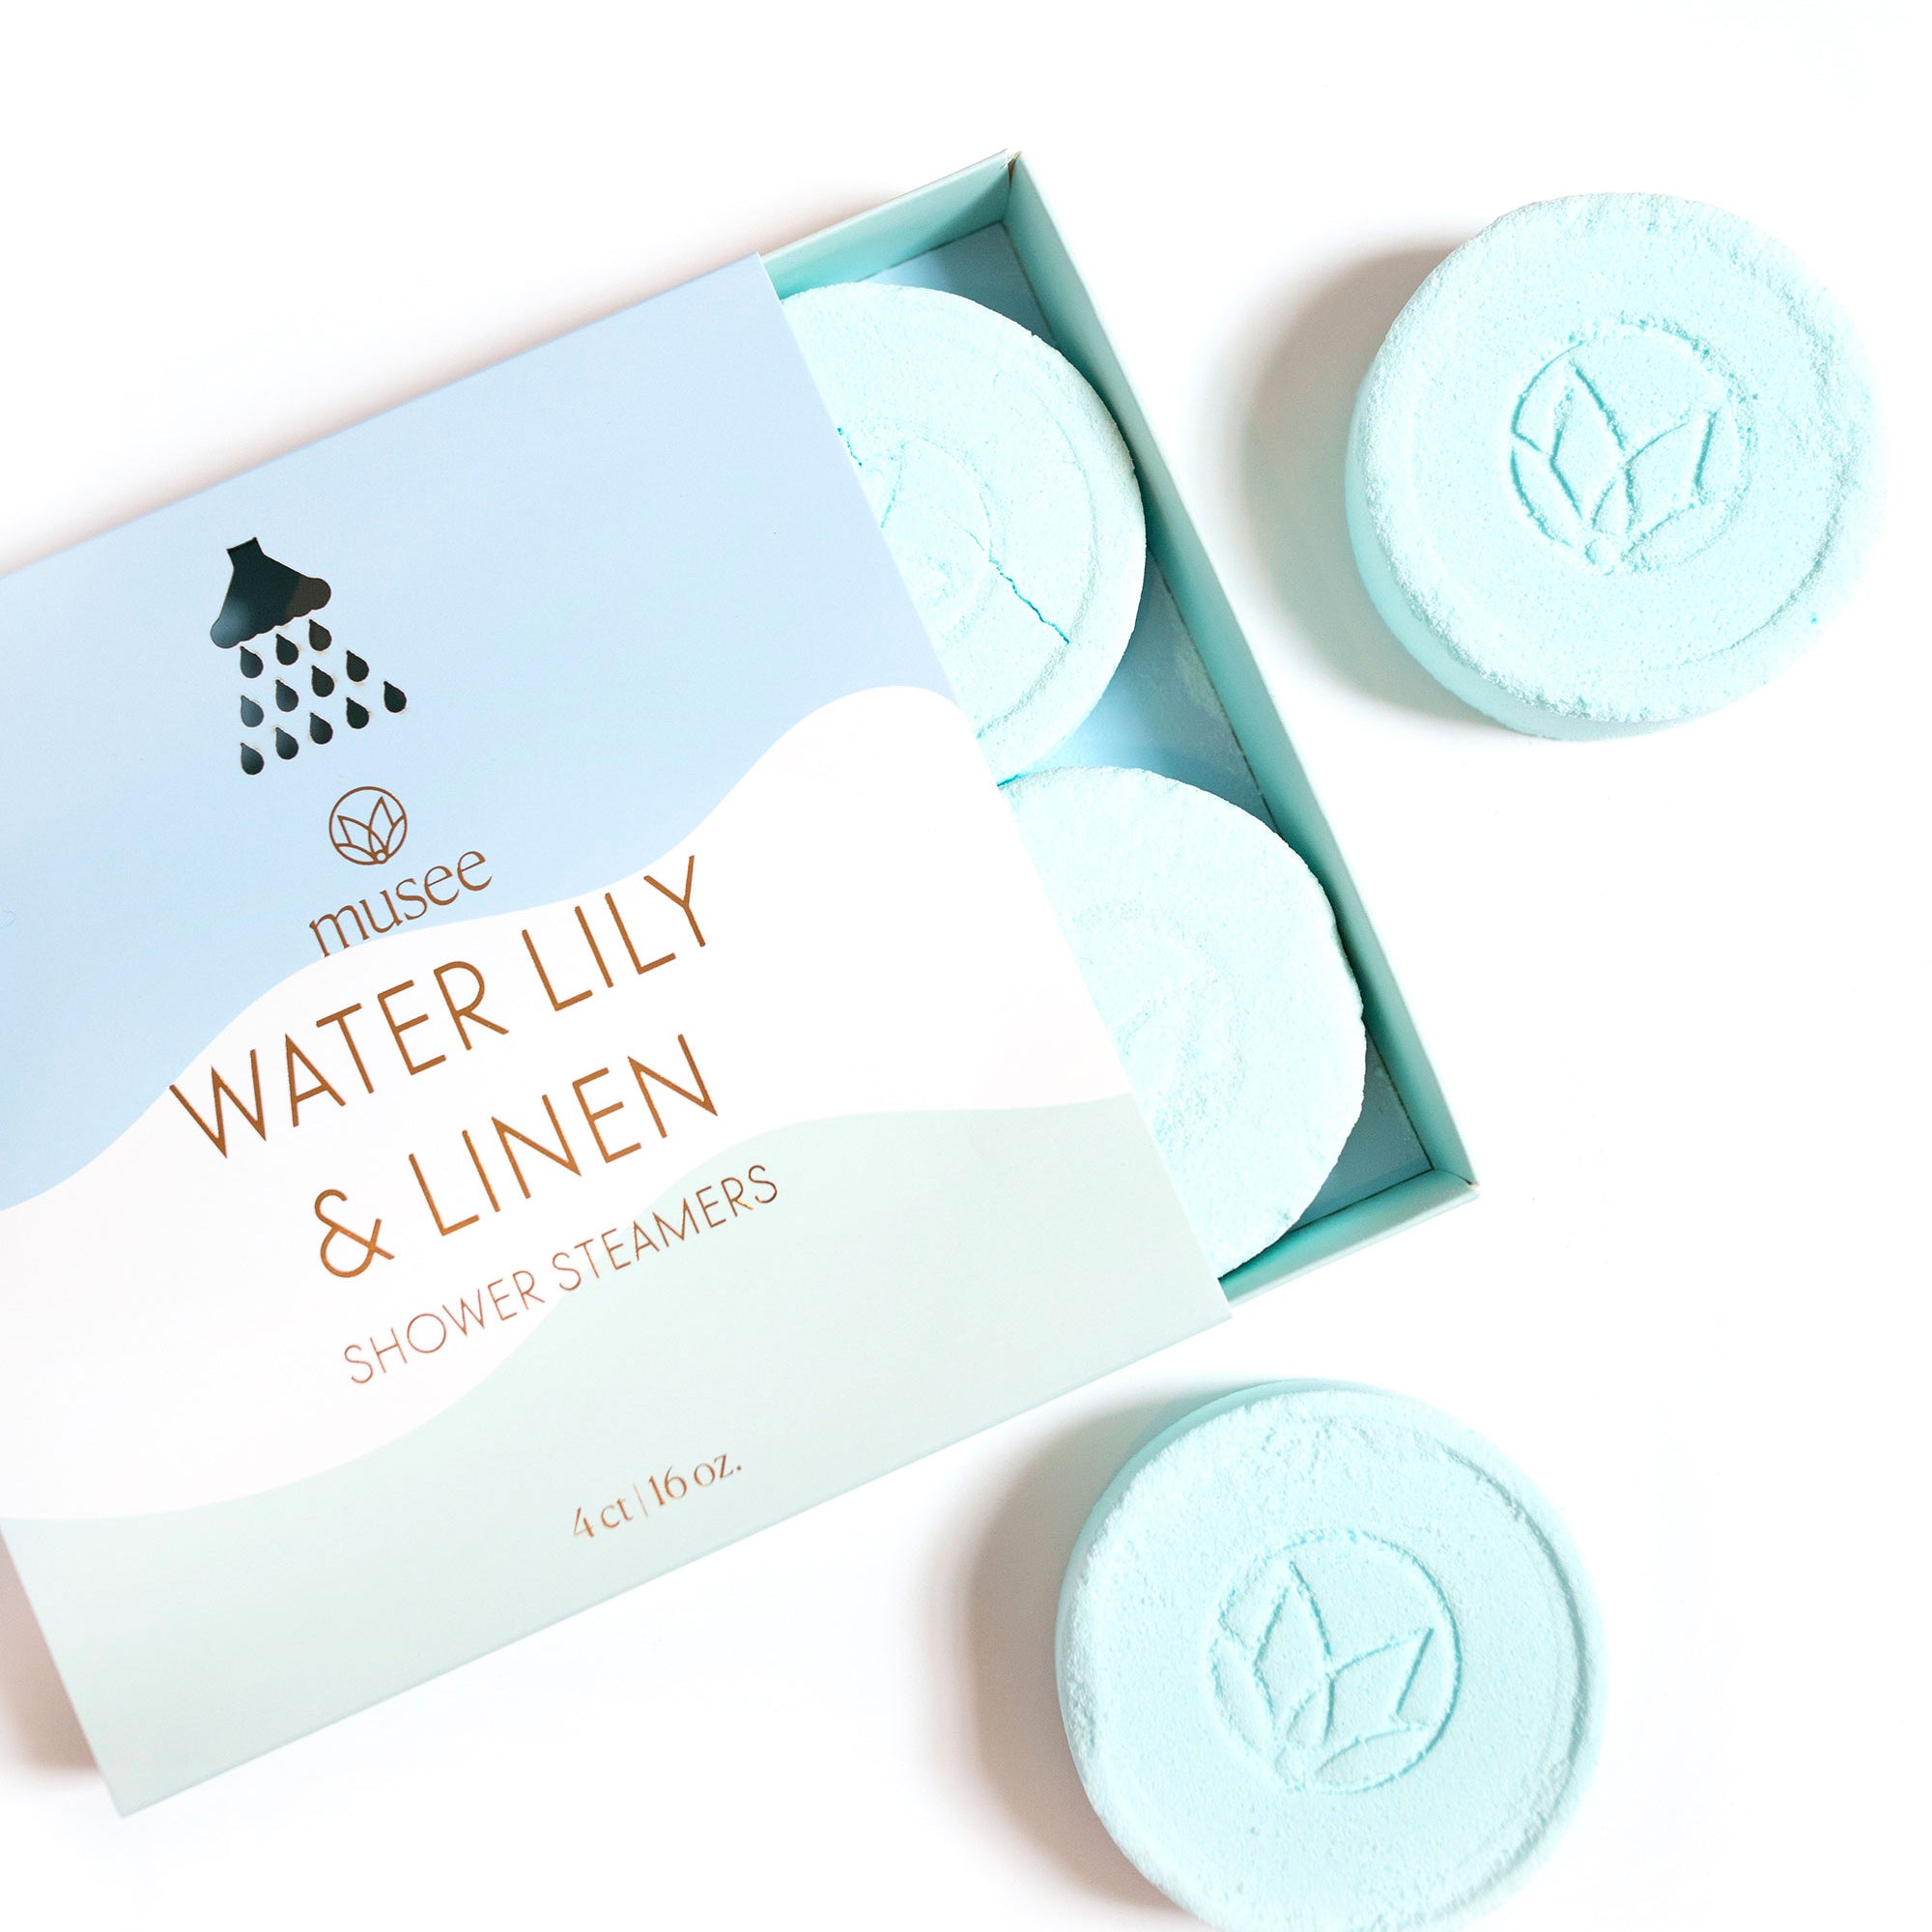 Water Lily and Linen Shower Steamers